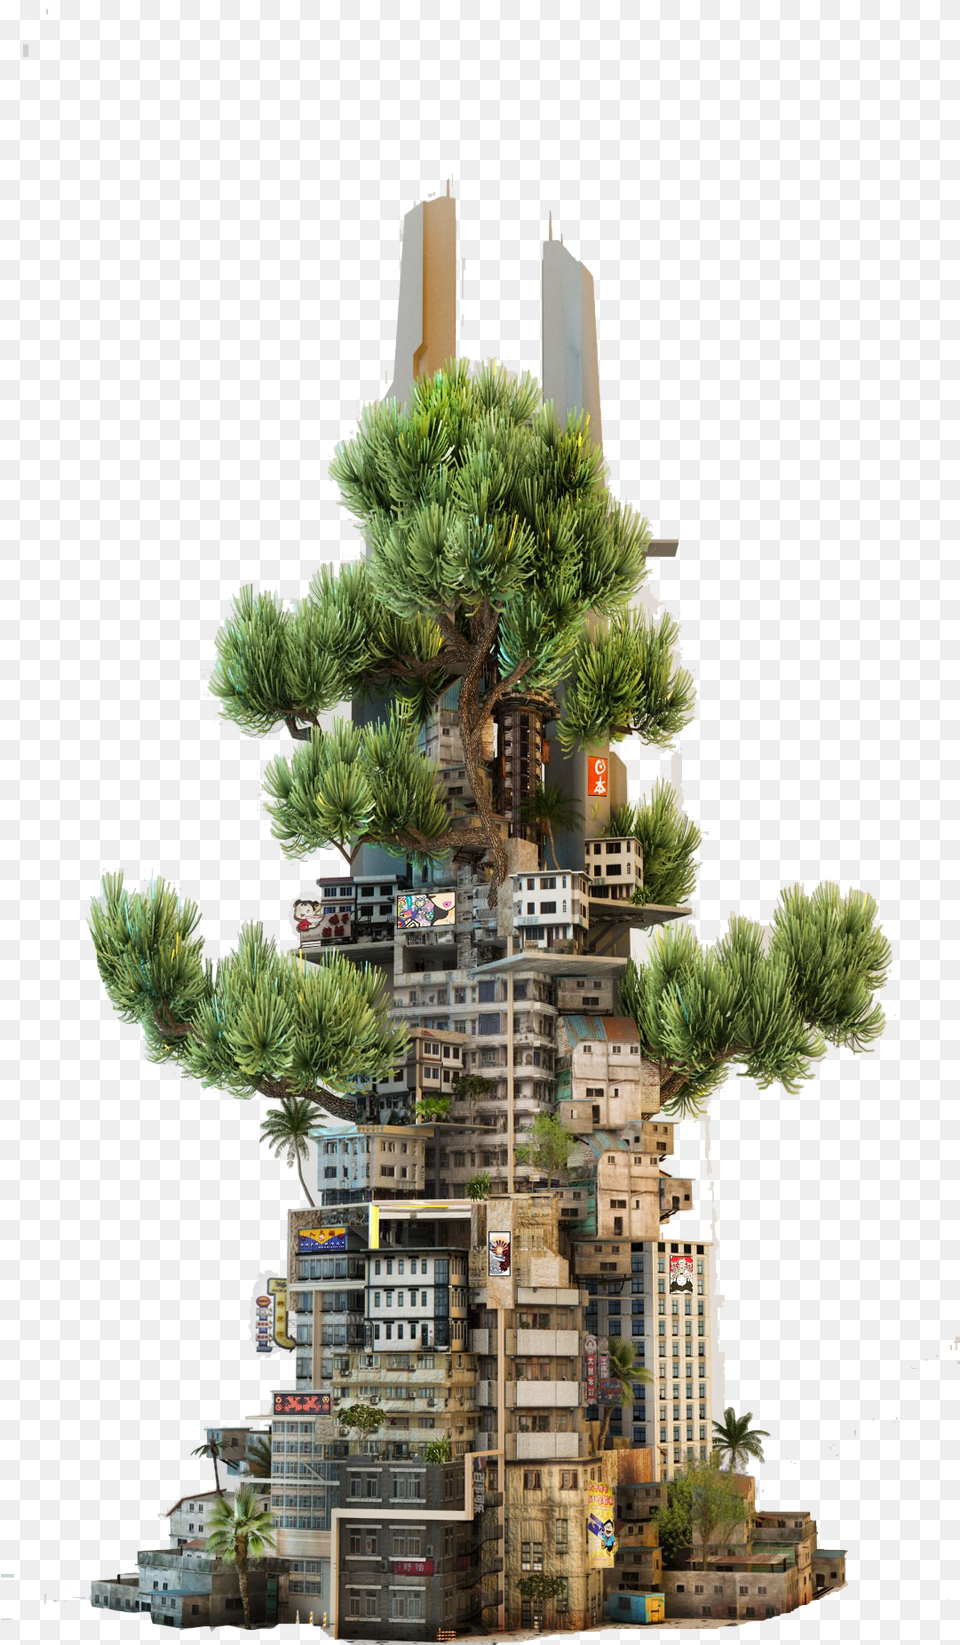 The Growing Building Image Architectural Design 1080, Urban, Tree, City, Potted Plant Png